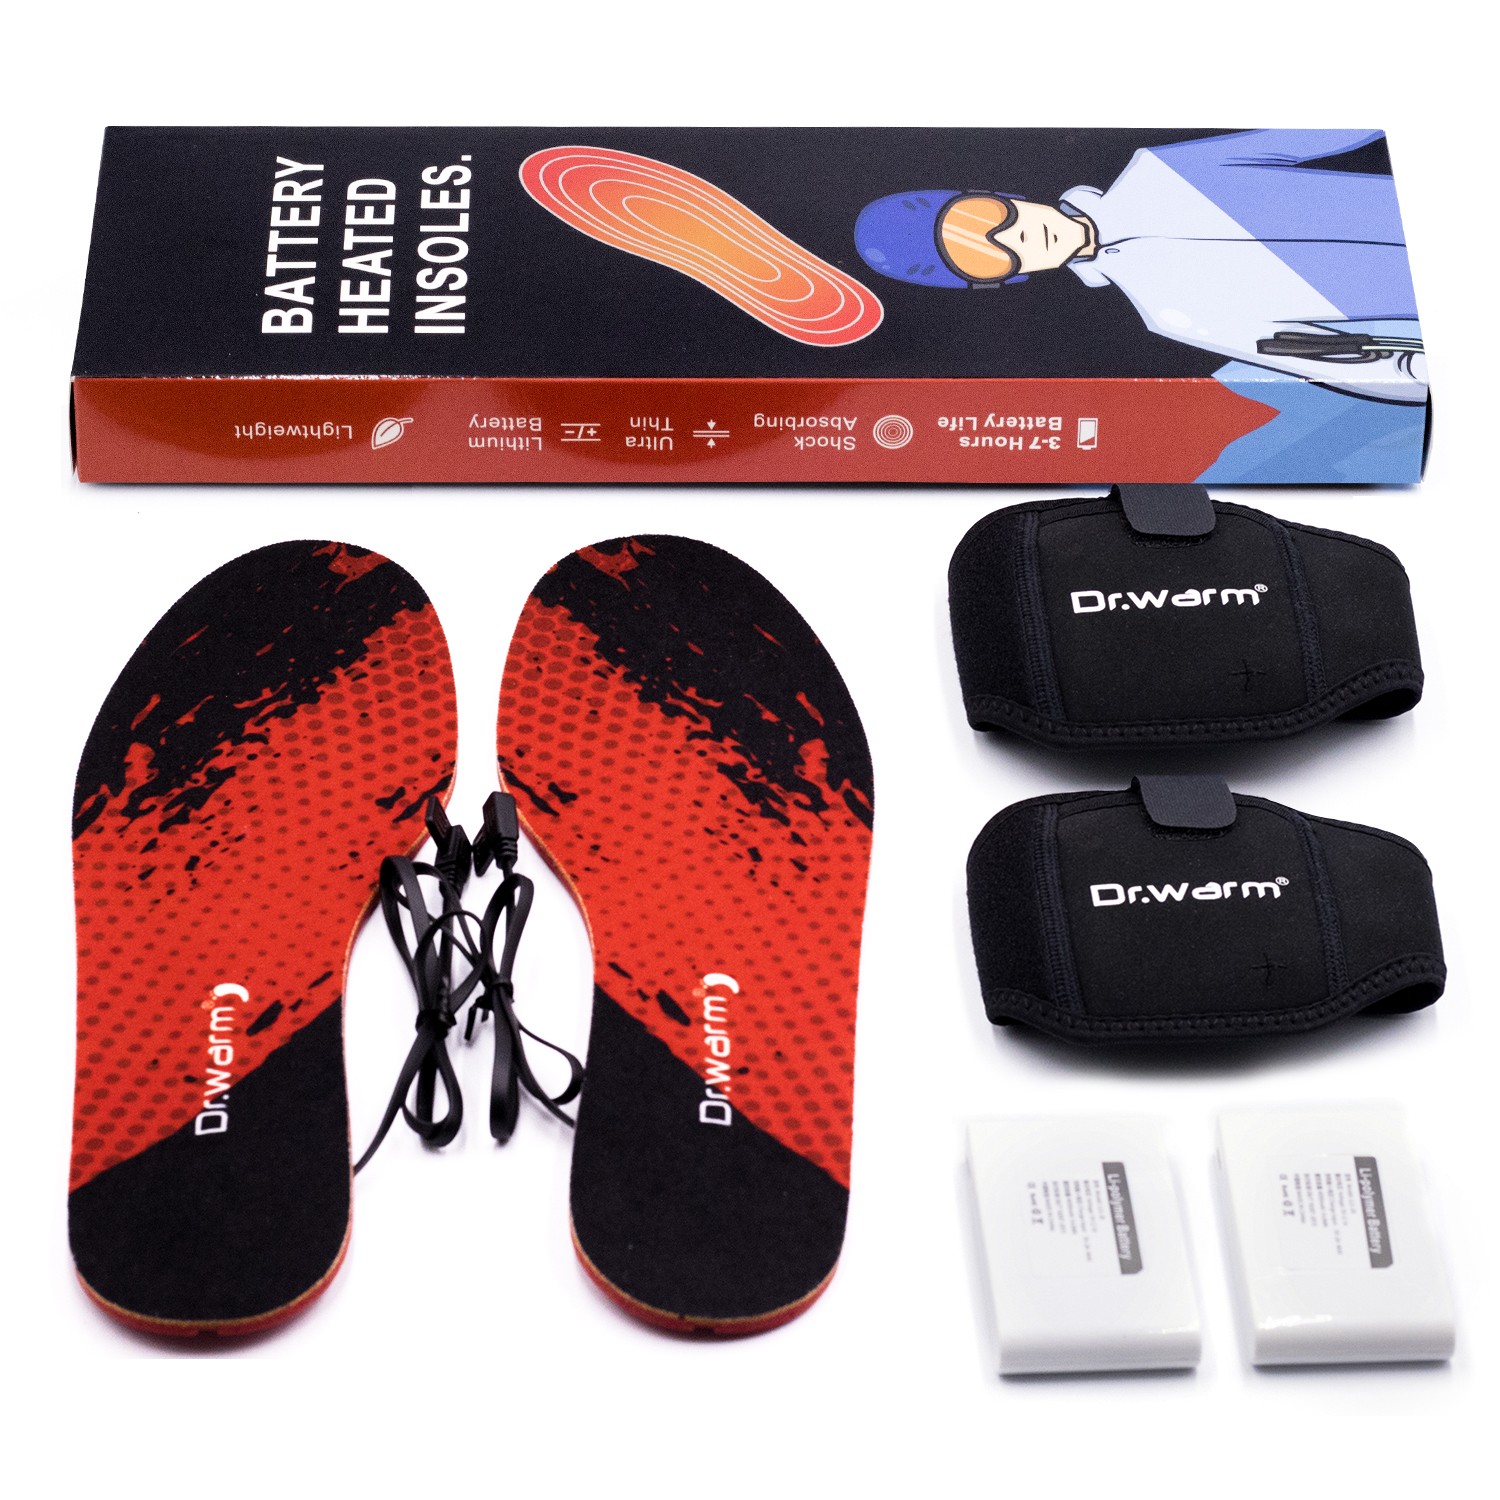 Dr. Warm rechargeable heated insoles for work boots fit to most shoes for indoor use-22